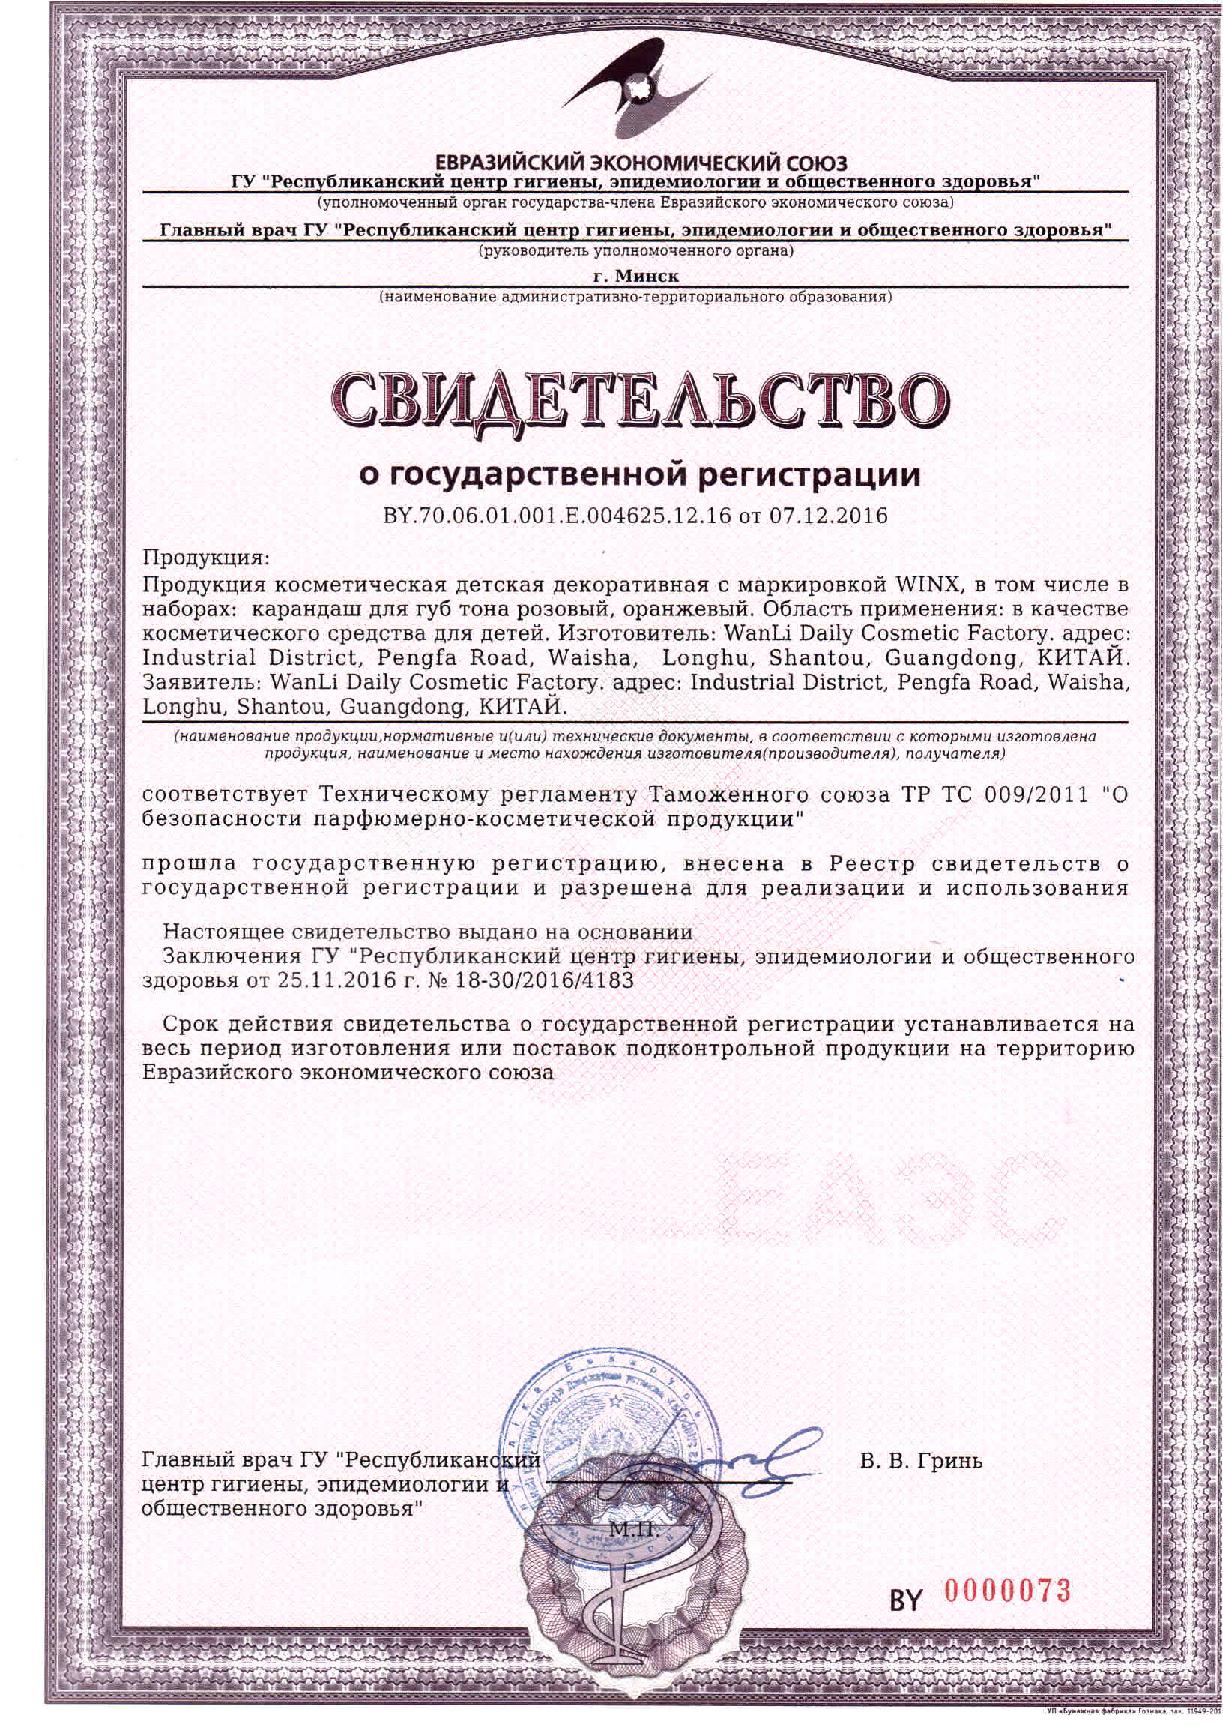 BY.70.06.01.001.E.004625.12.16: /images/certificates/BY.70.06.01.001.E.004625.12.16.jpg